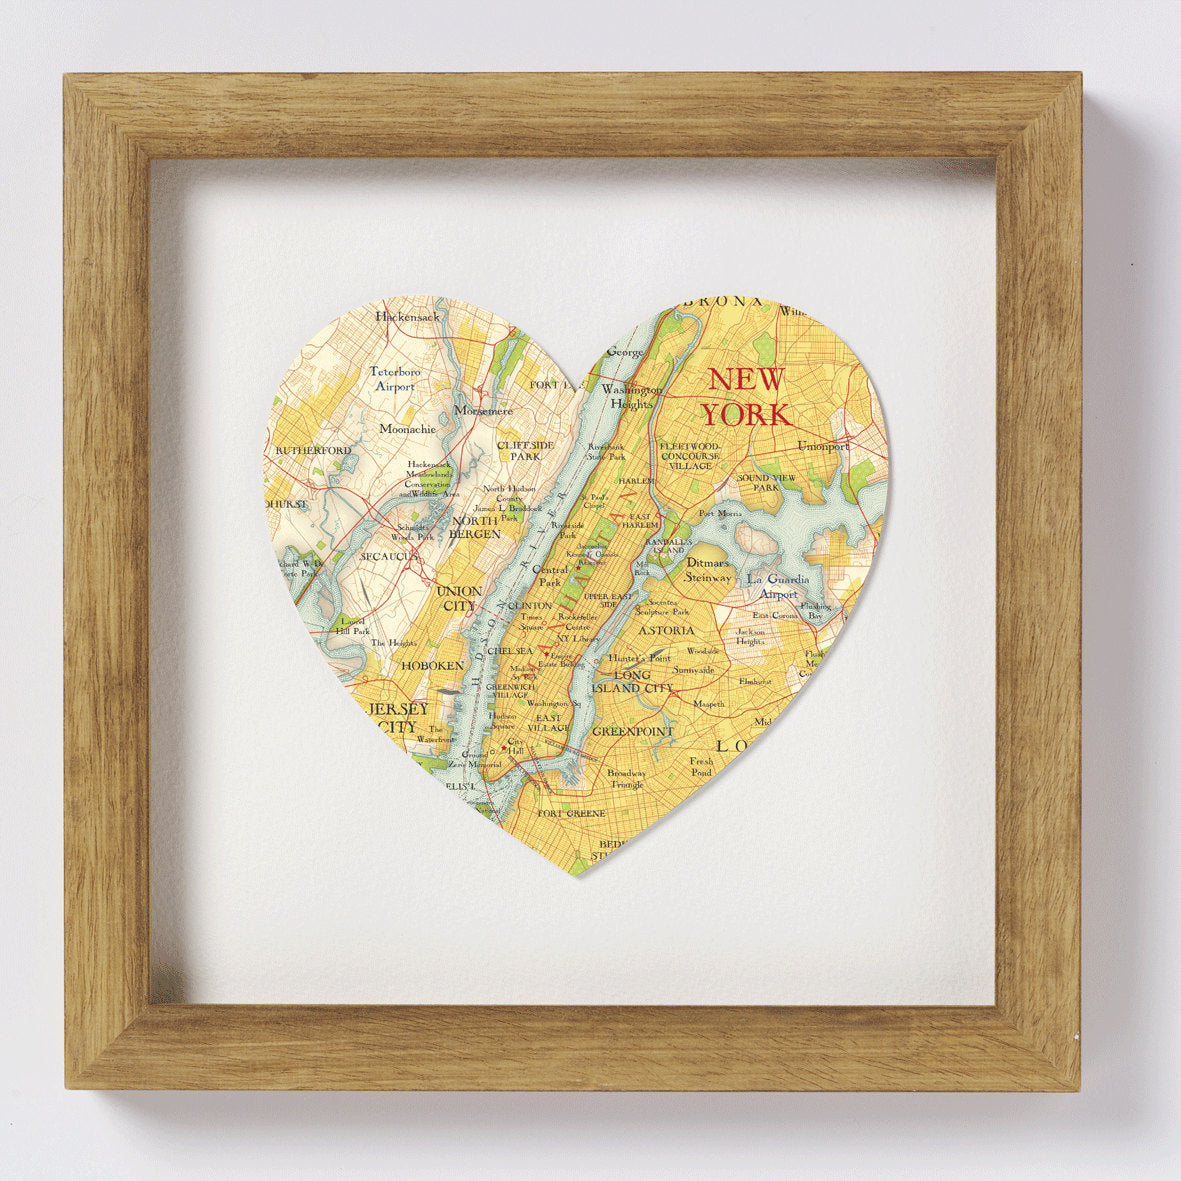 DIY heart map art thoughtful valentine's day gift ideas